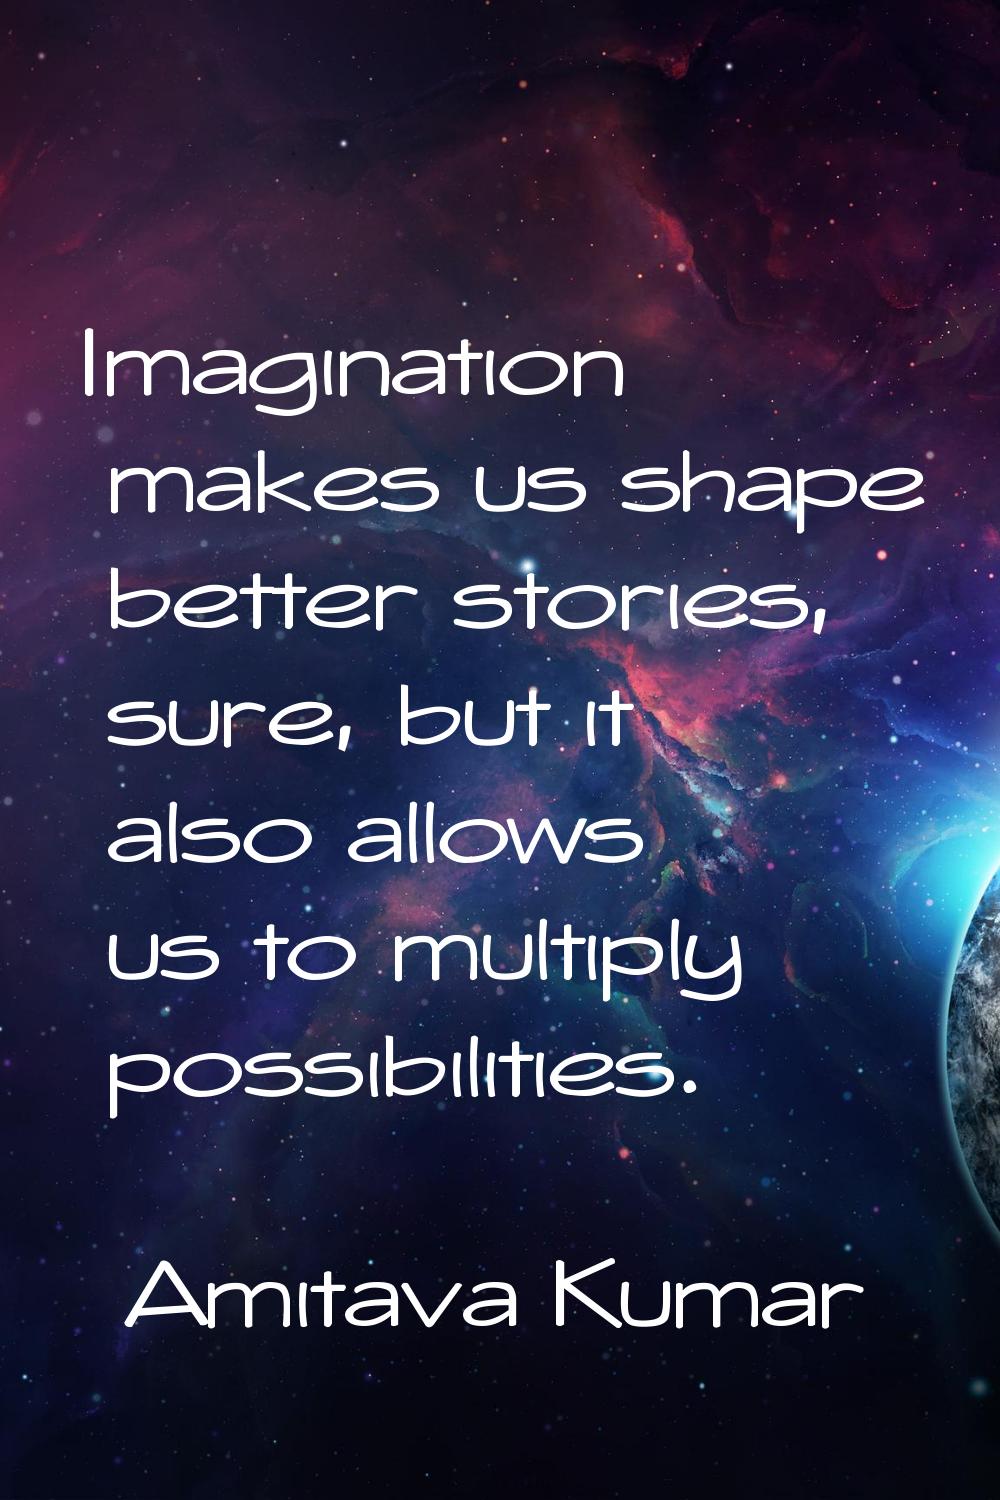 Imagination makes us shape better stories, sure, but it also allows us to multiply possibilities.